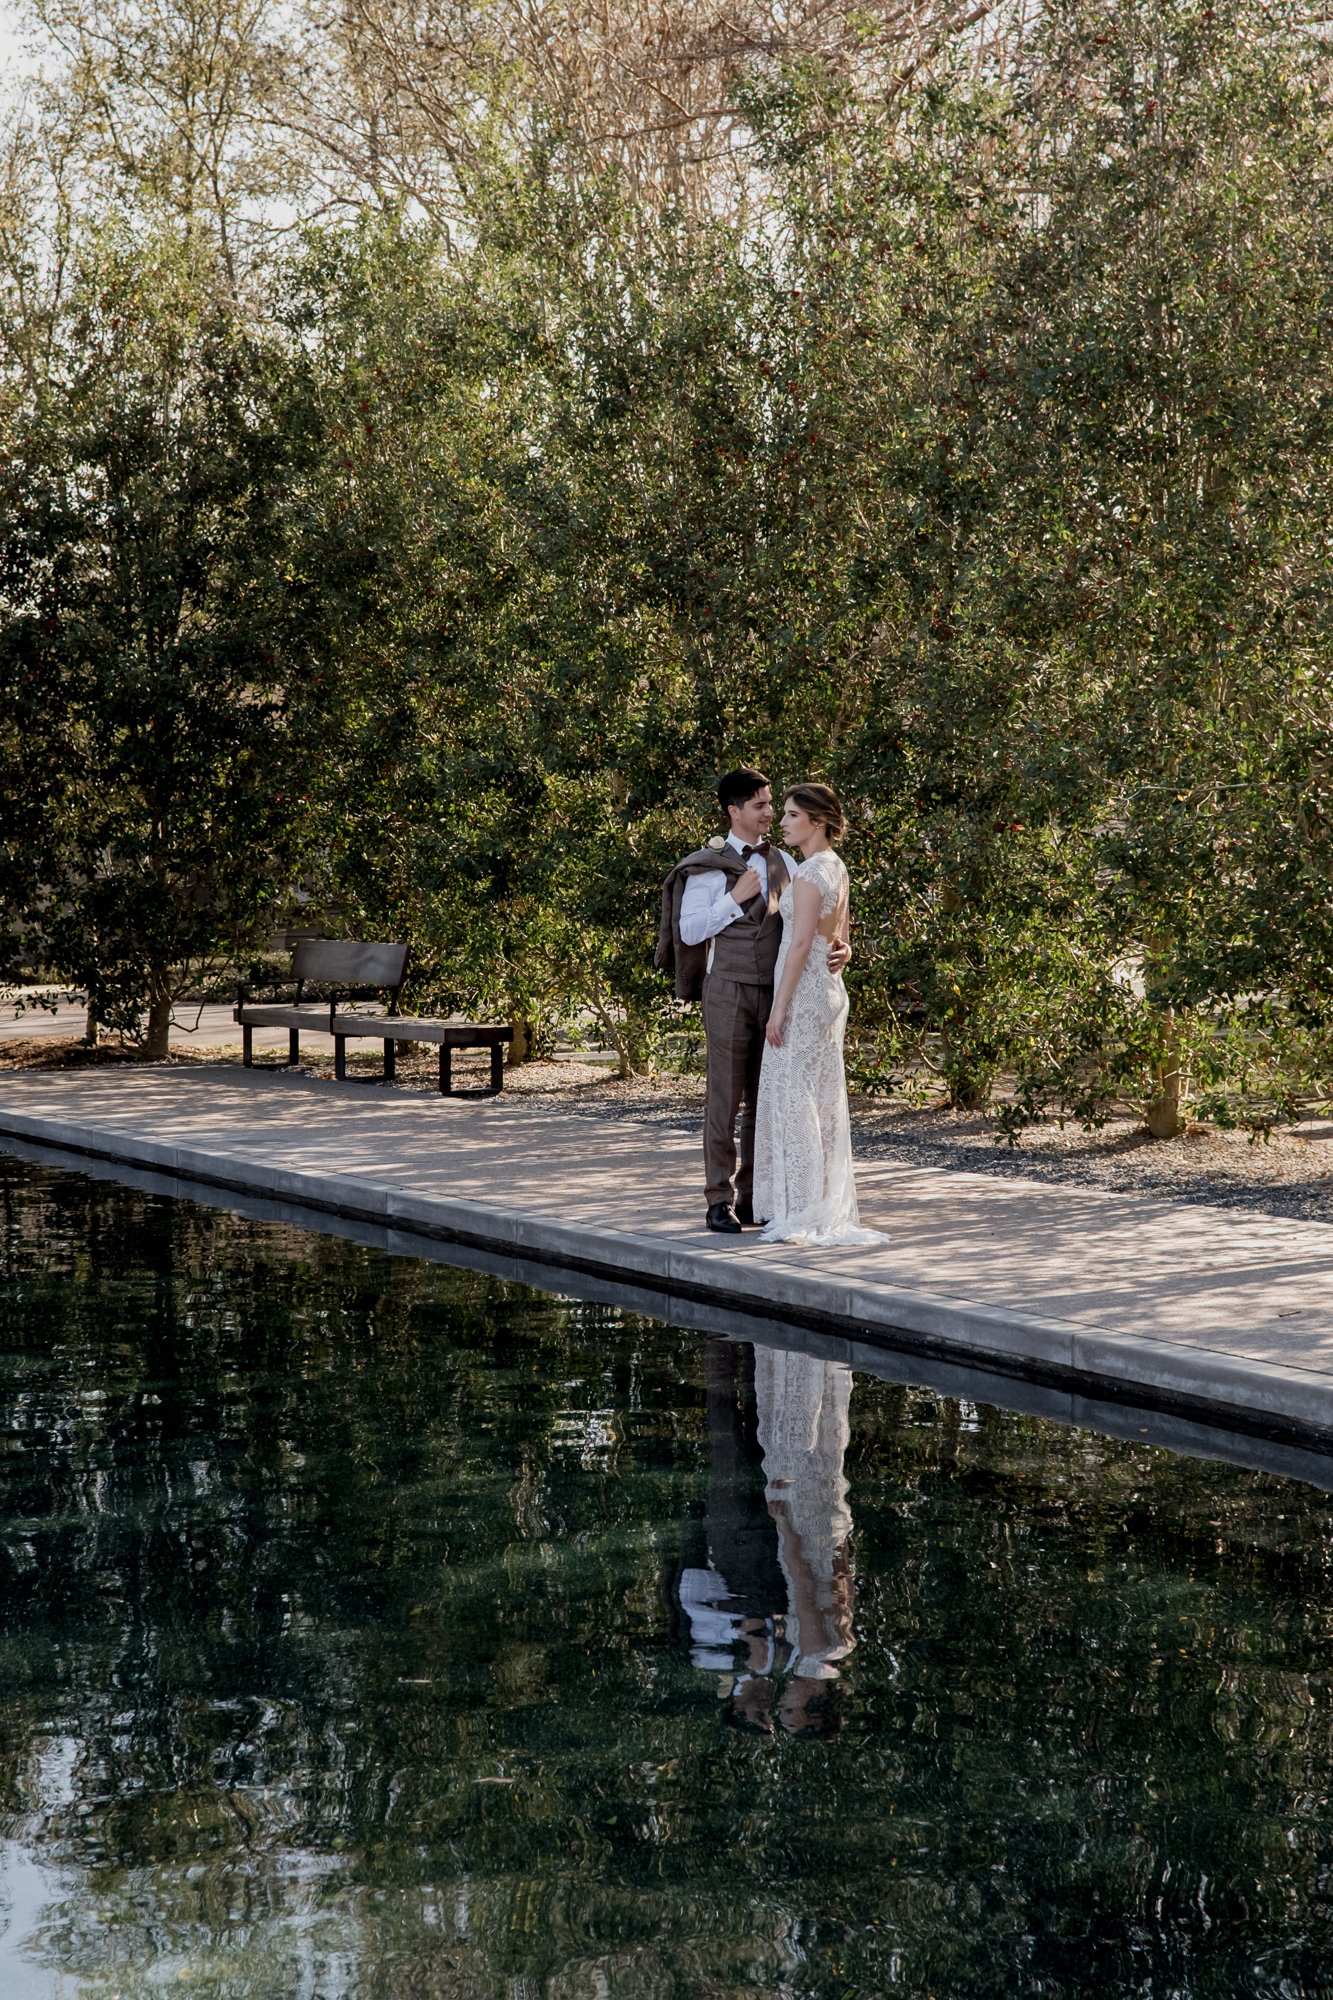 Wedding bride and groom portraits at Menil Park by the Rothko Chapel Pool